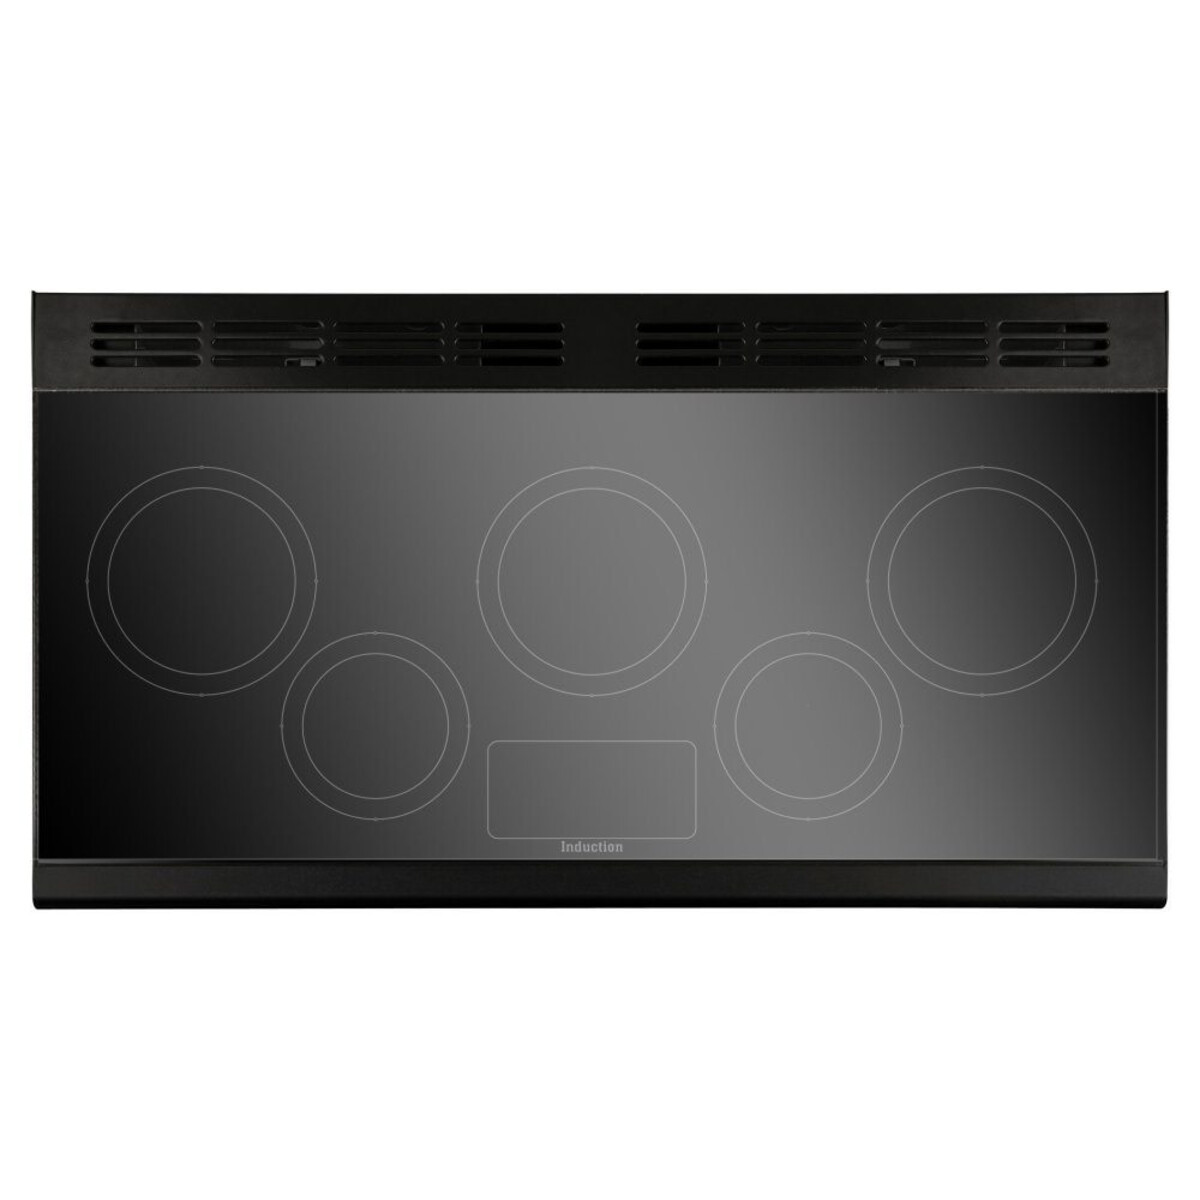 Rangemaster CDL110EICB/C CLASSIC DELUXE 110cm Induction Cooker, Charcoal Black